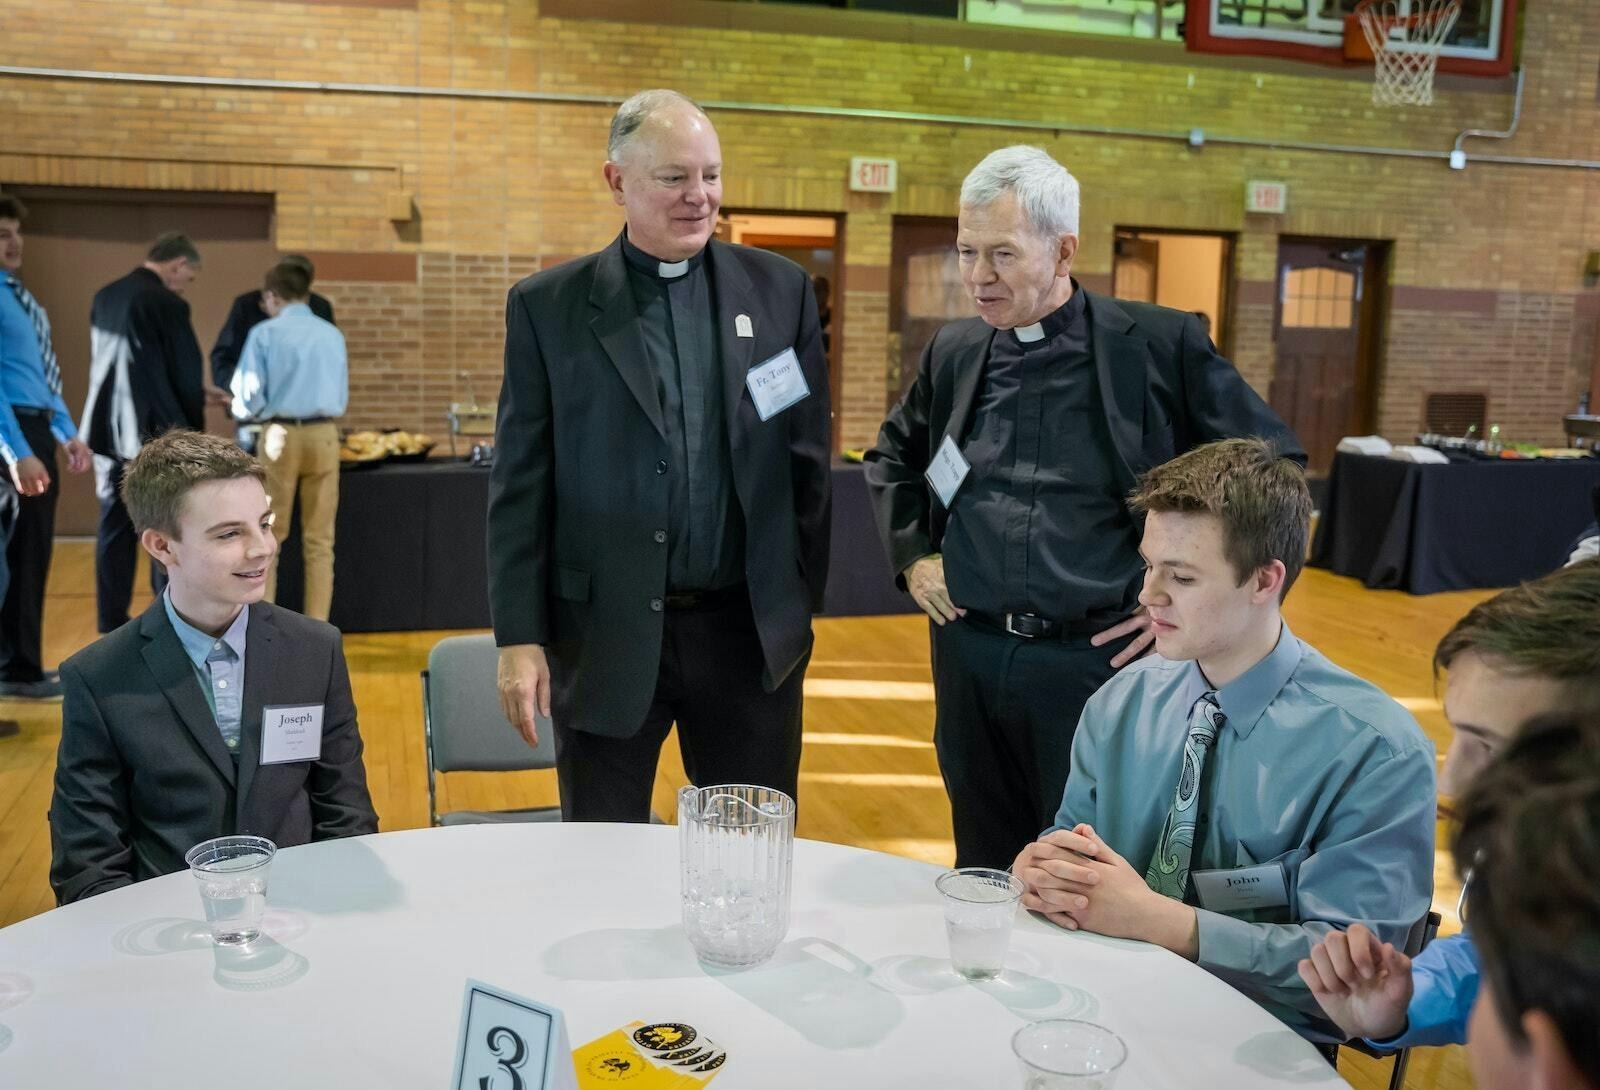 Msgr. Trapp, second right, and Fr. Tony Richter talk with young men attending a vocational discernment dinner with Detroit Archbishop Allen H. Vigneron at Sacred Heart Major Seminary on March 28, 2023. Msgr. Trapp served as a graduate spiritual director for seminarians and associate professor of theology, liturgy and the sacraments at the seminary for more than 35 years. (Valaurian Waller | Detroit Catholic)